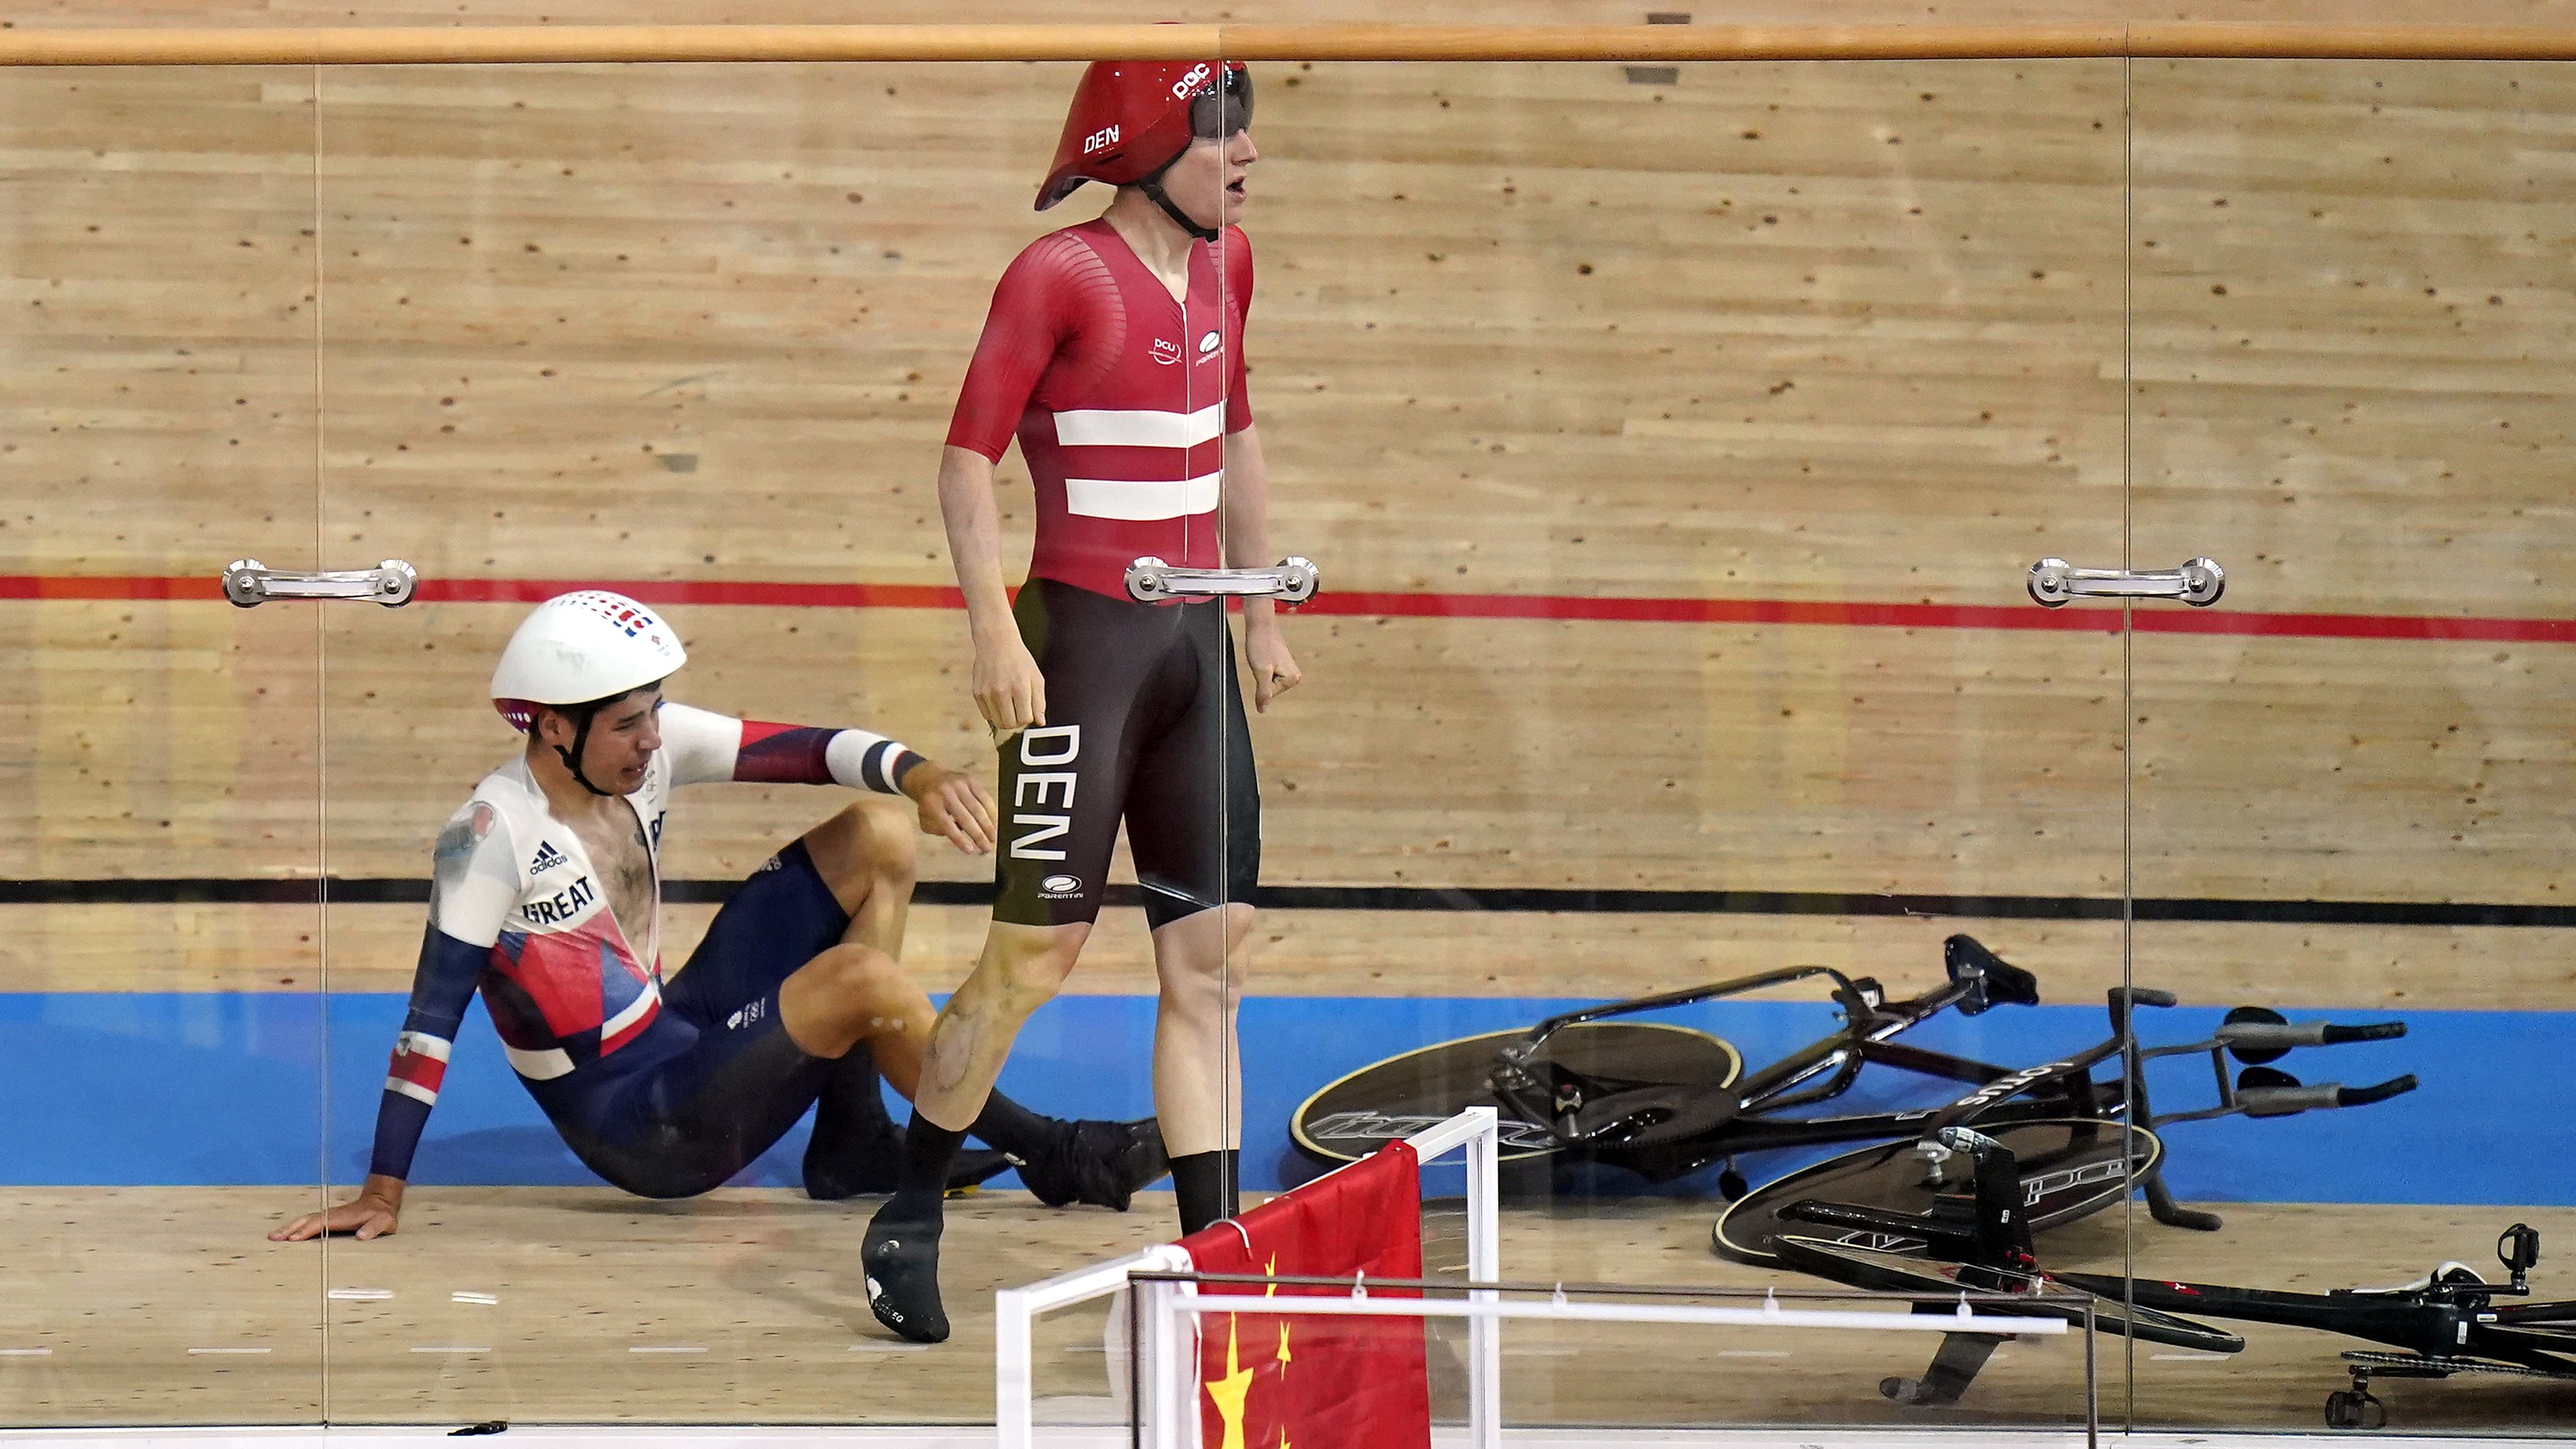 Danish cyclist takes out British opponent in 'incredible' track chaos at Tokyo Games